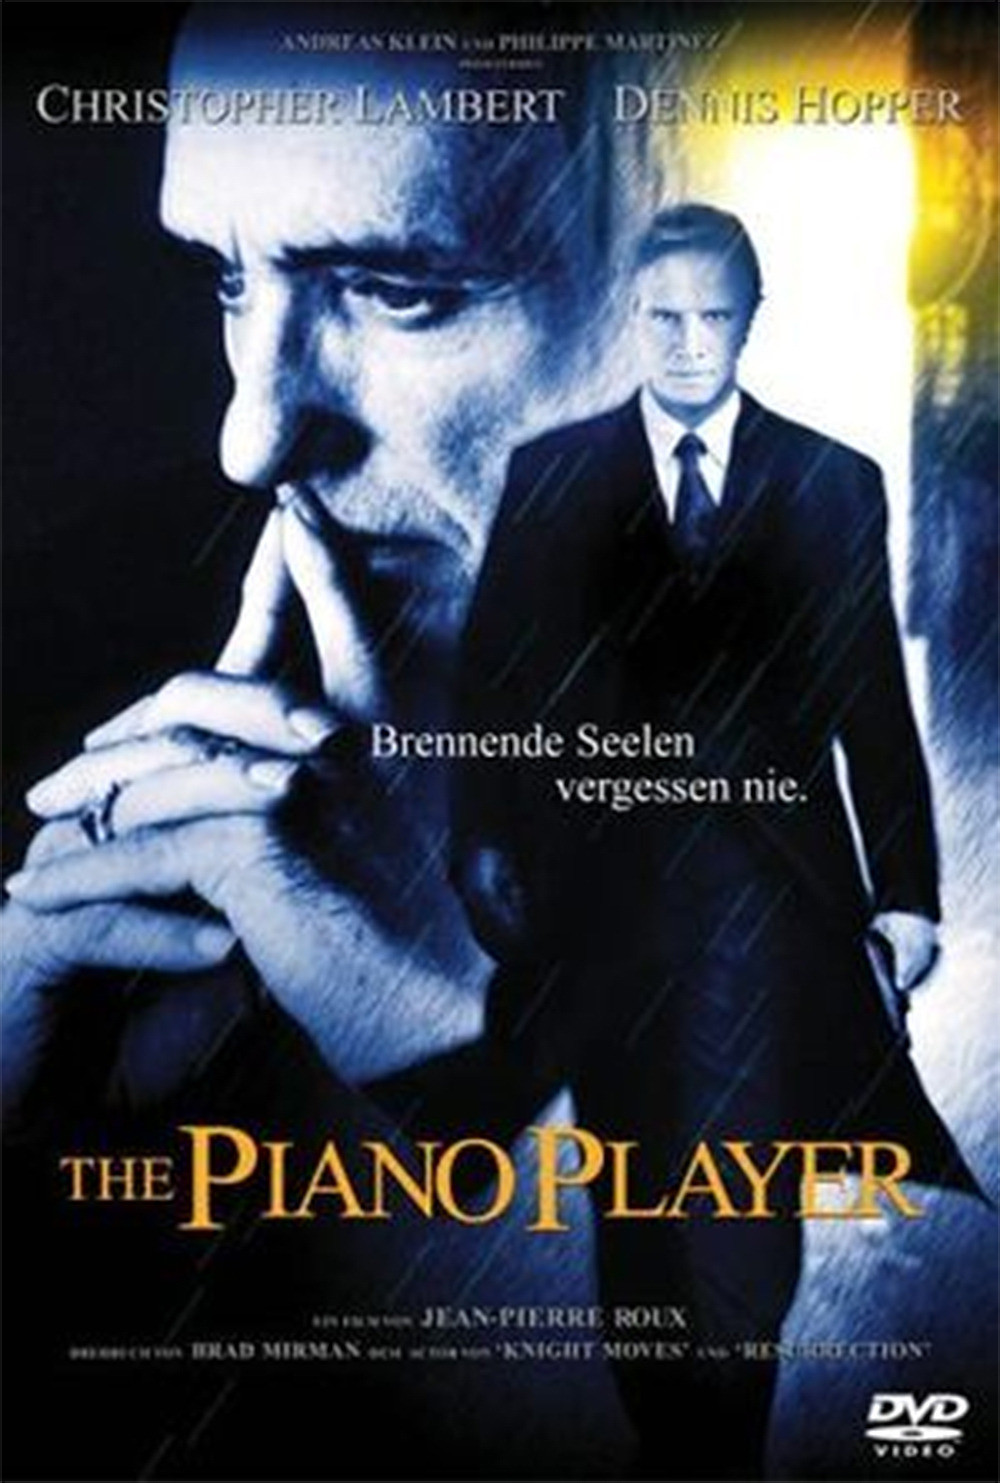 Poster for the movie "The Piano Player"